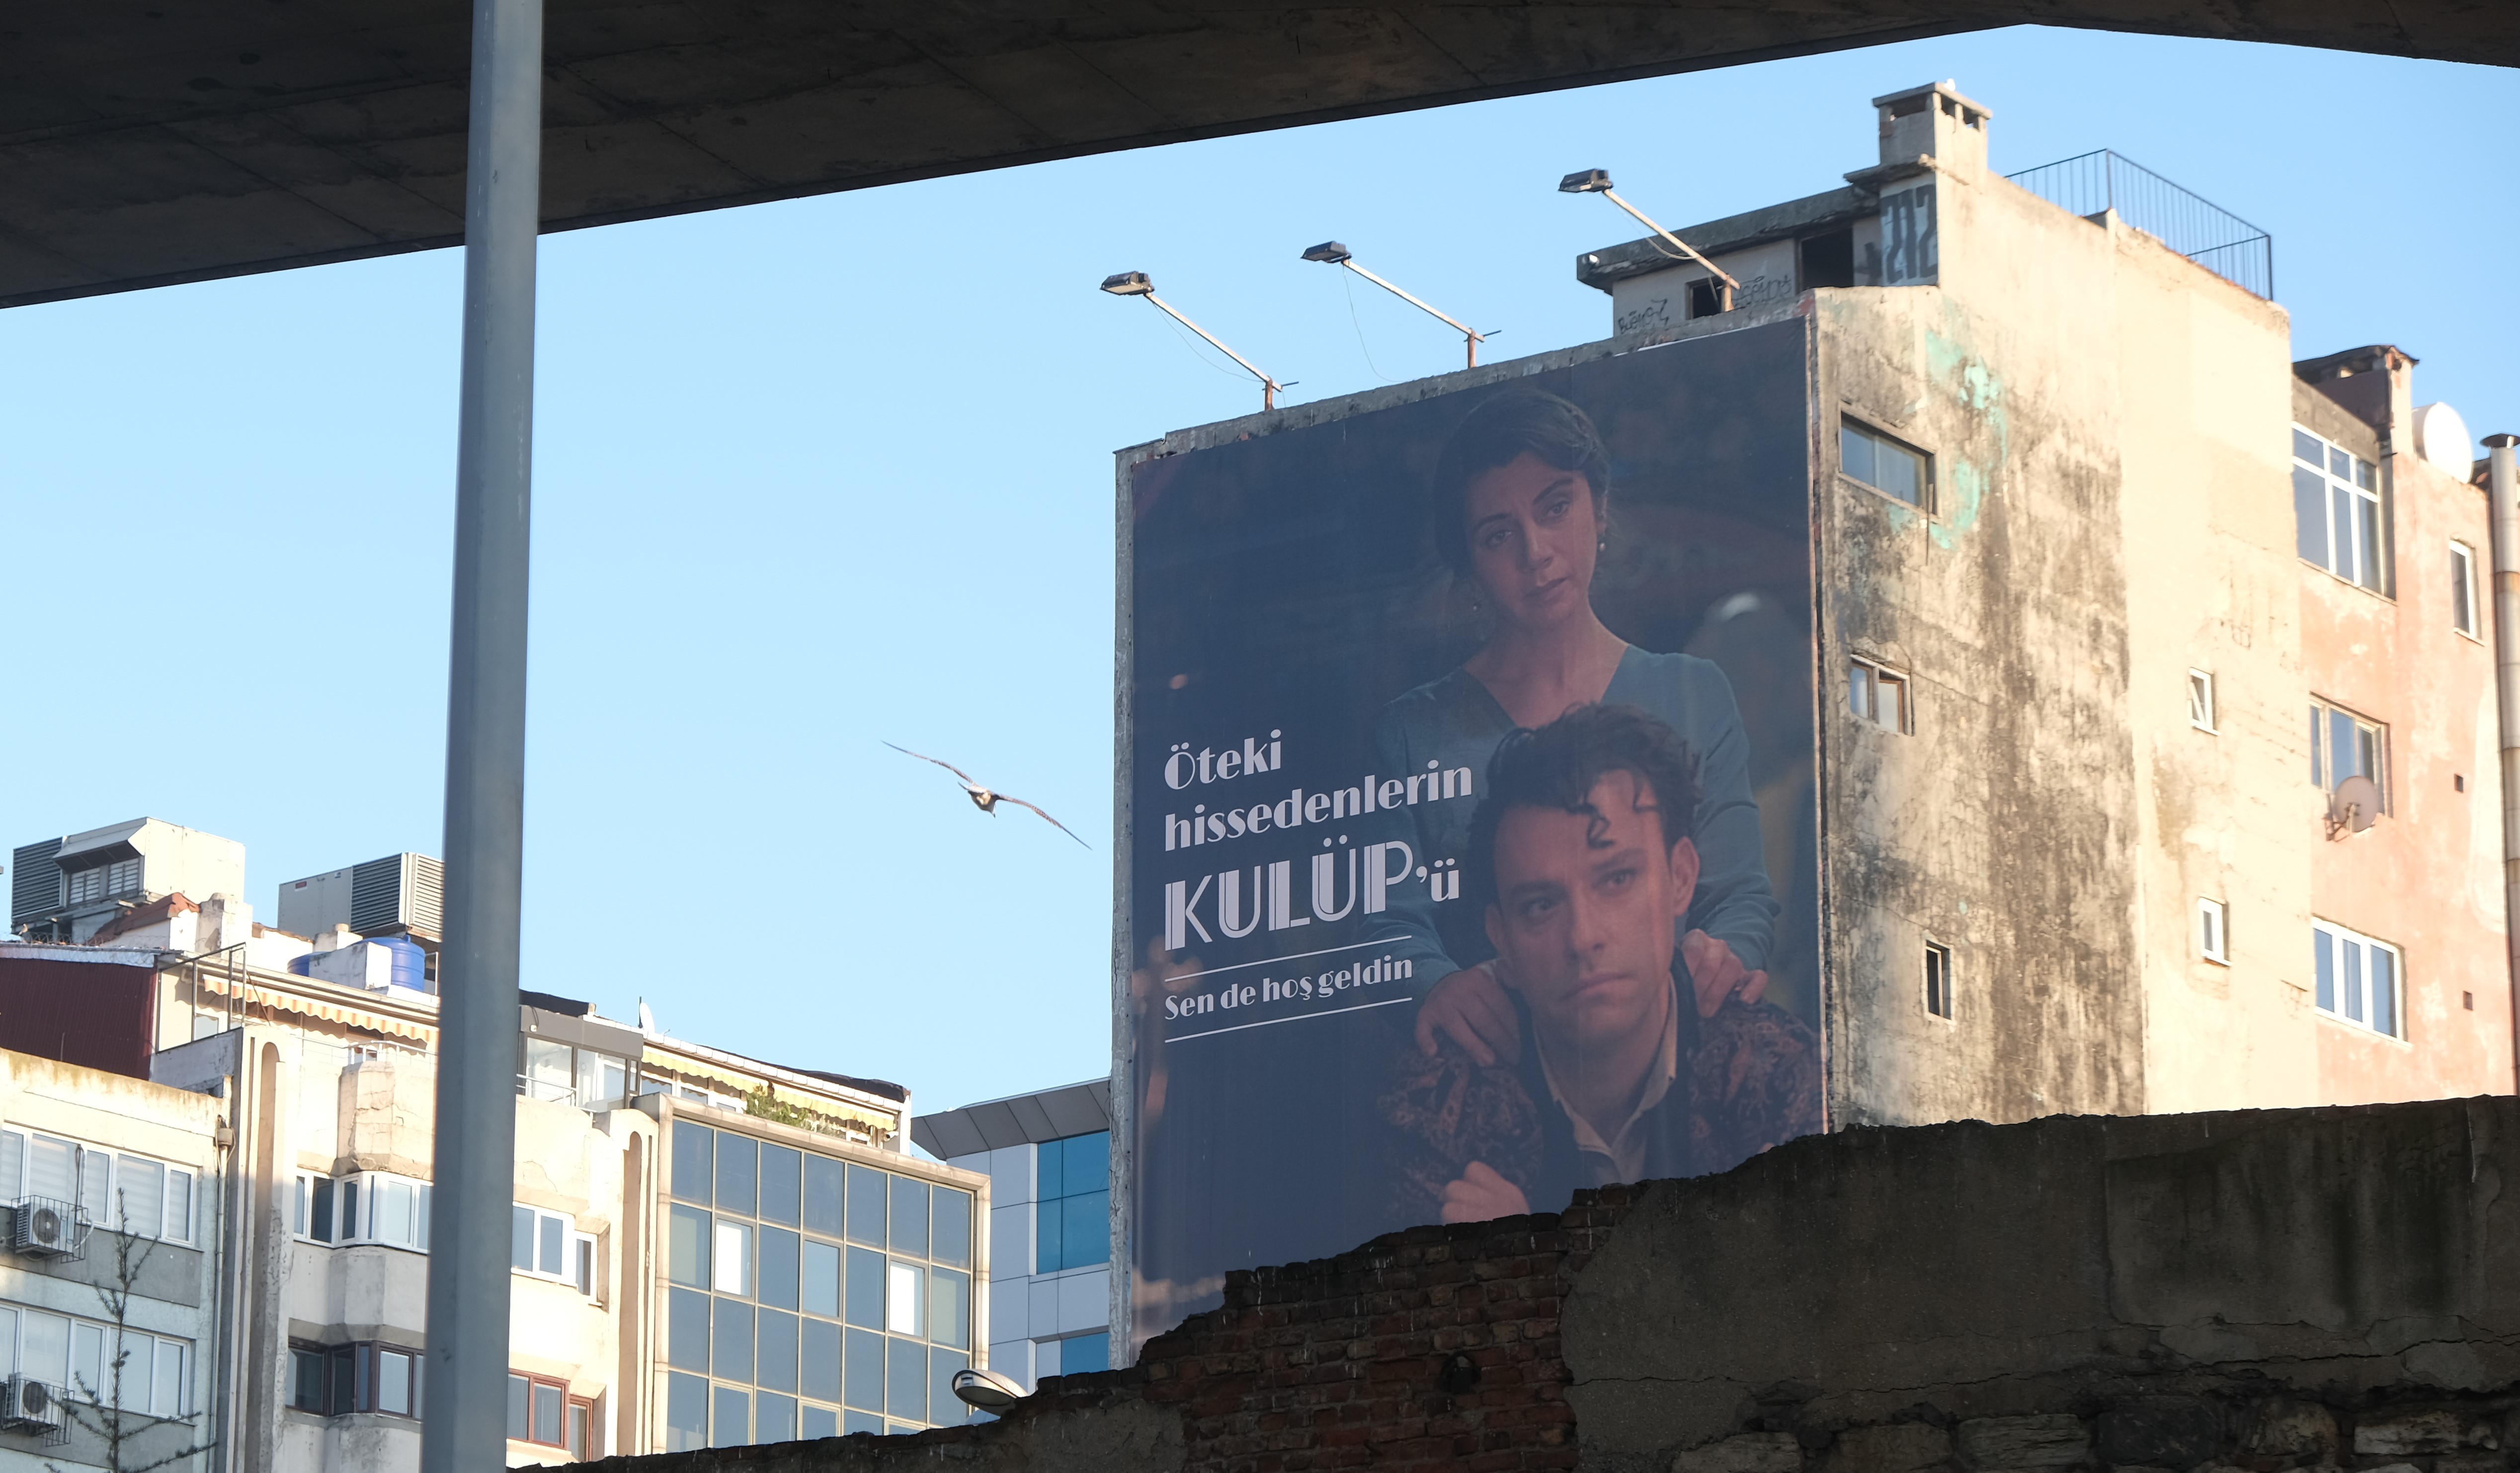 Hoarding advertising Netflix' "The Club" series on the side of a building in Istanbul (photo: Volkan Kisa)